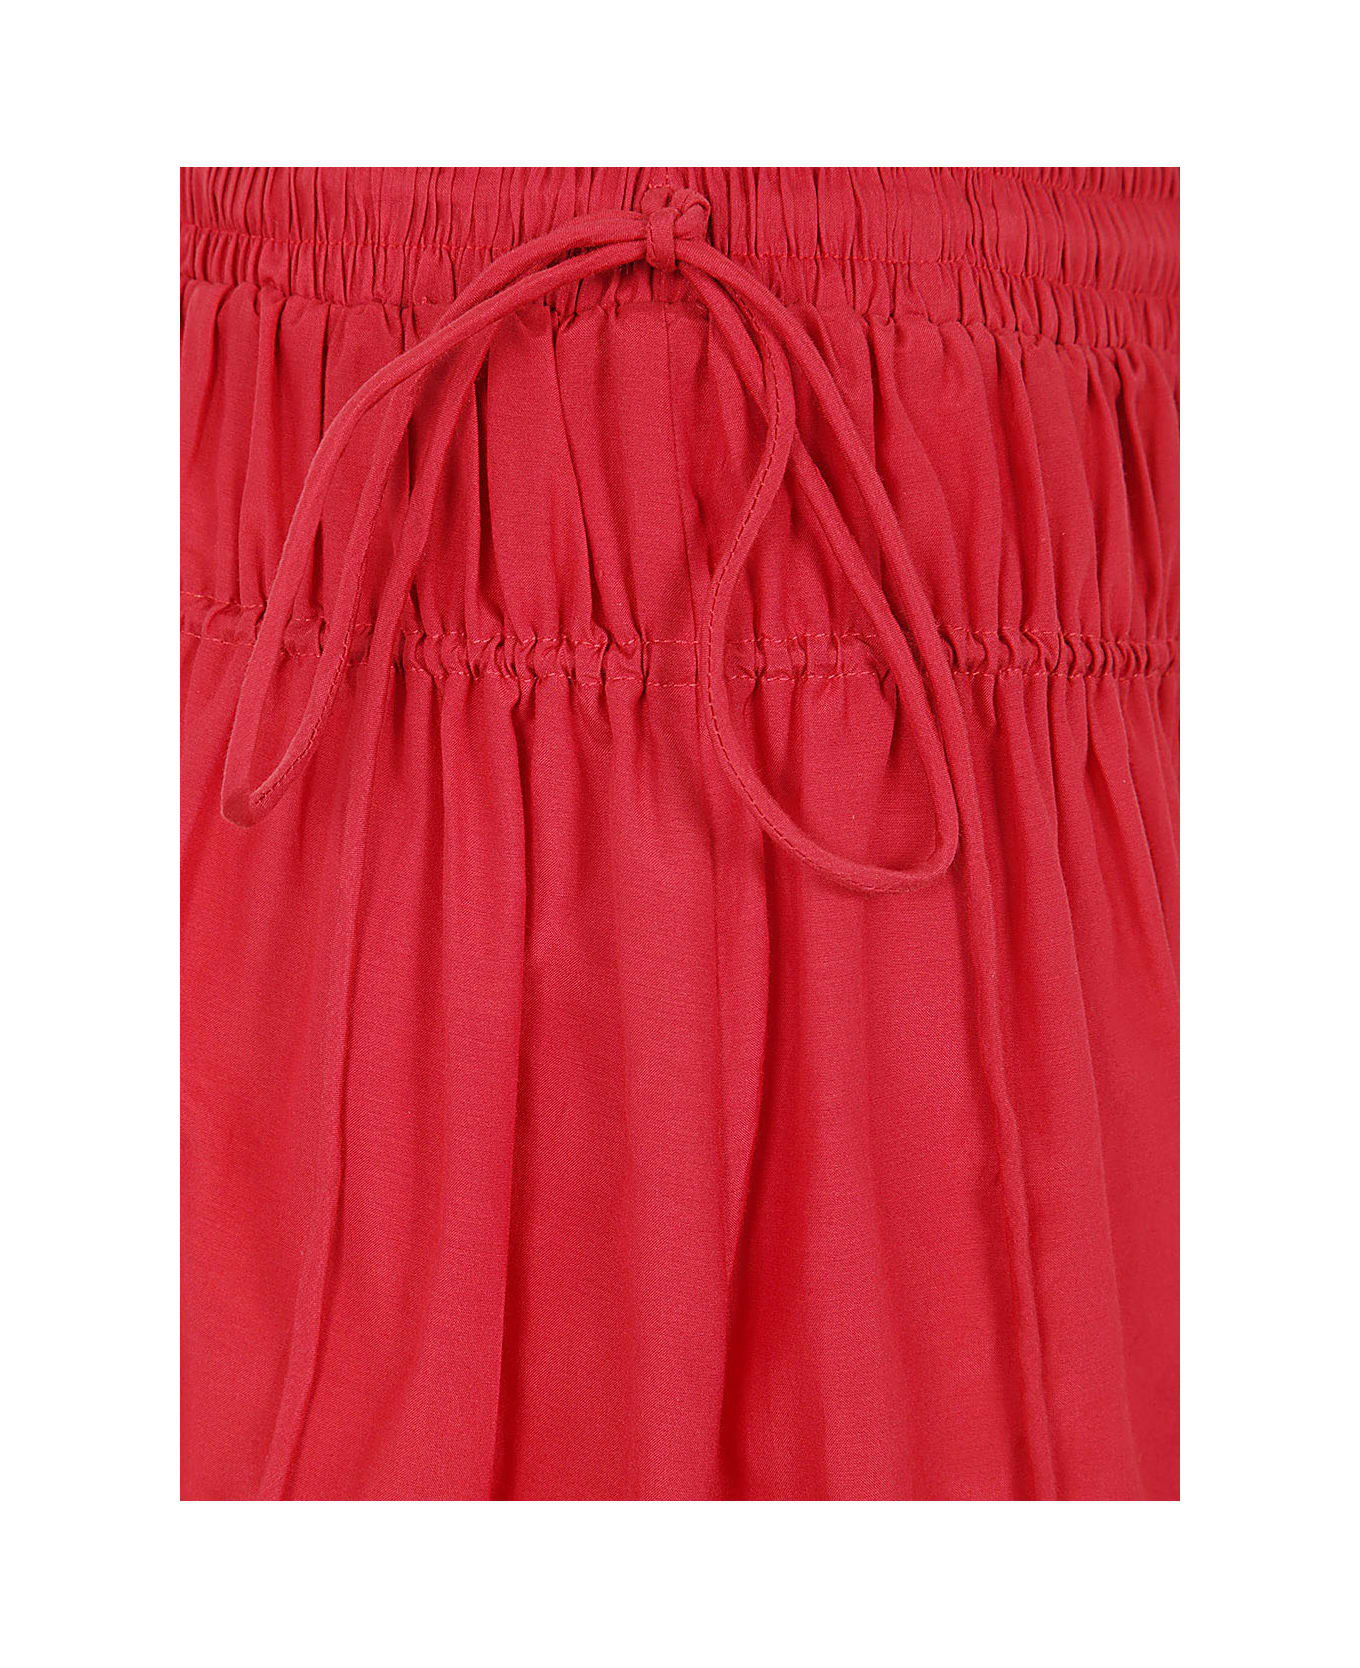 Paul Smith Popeline Skirt With Curl On Waist - Red スカート